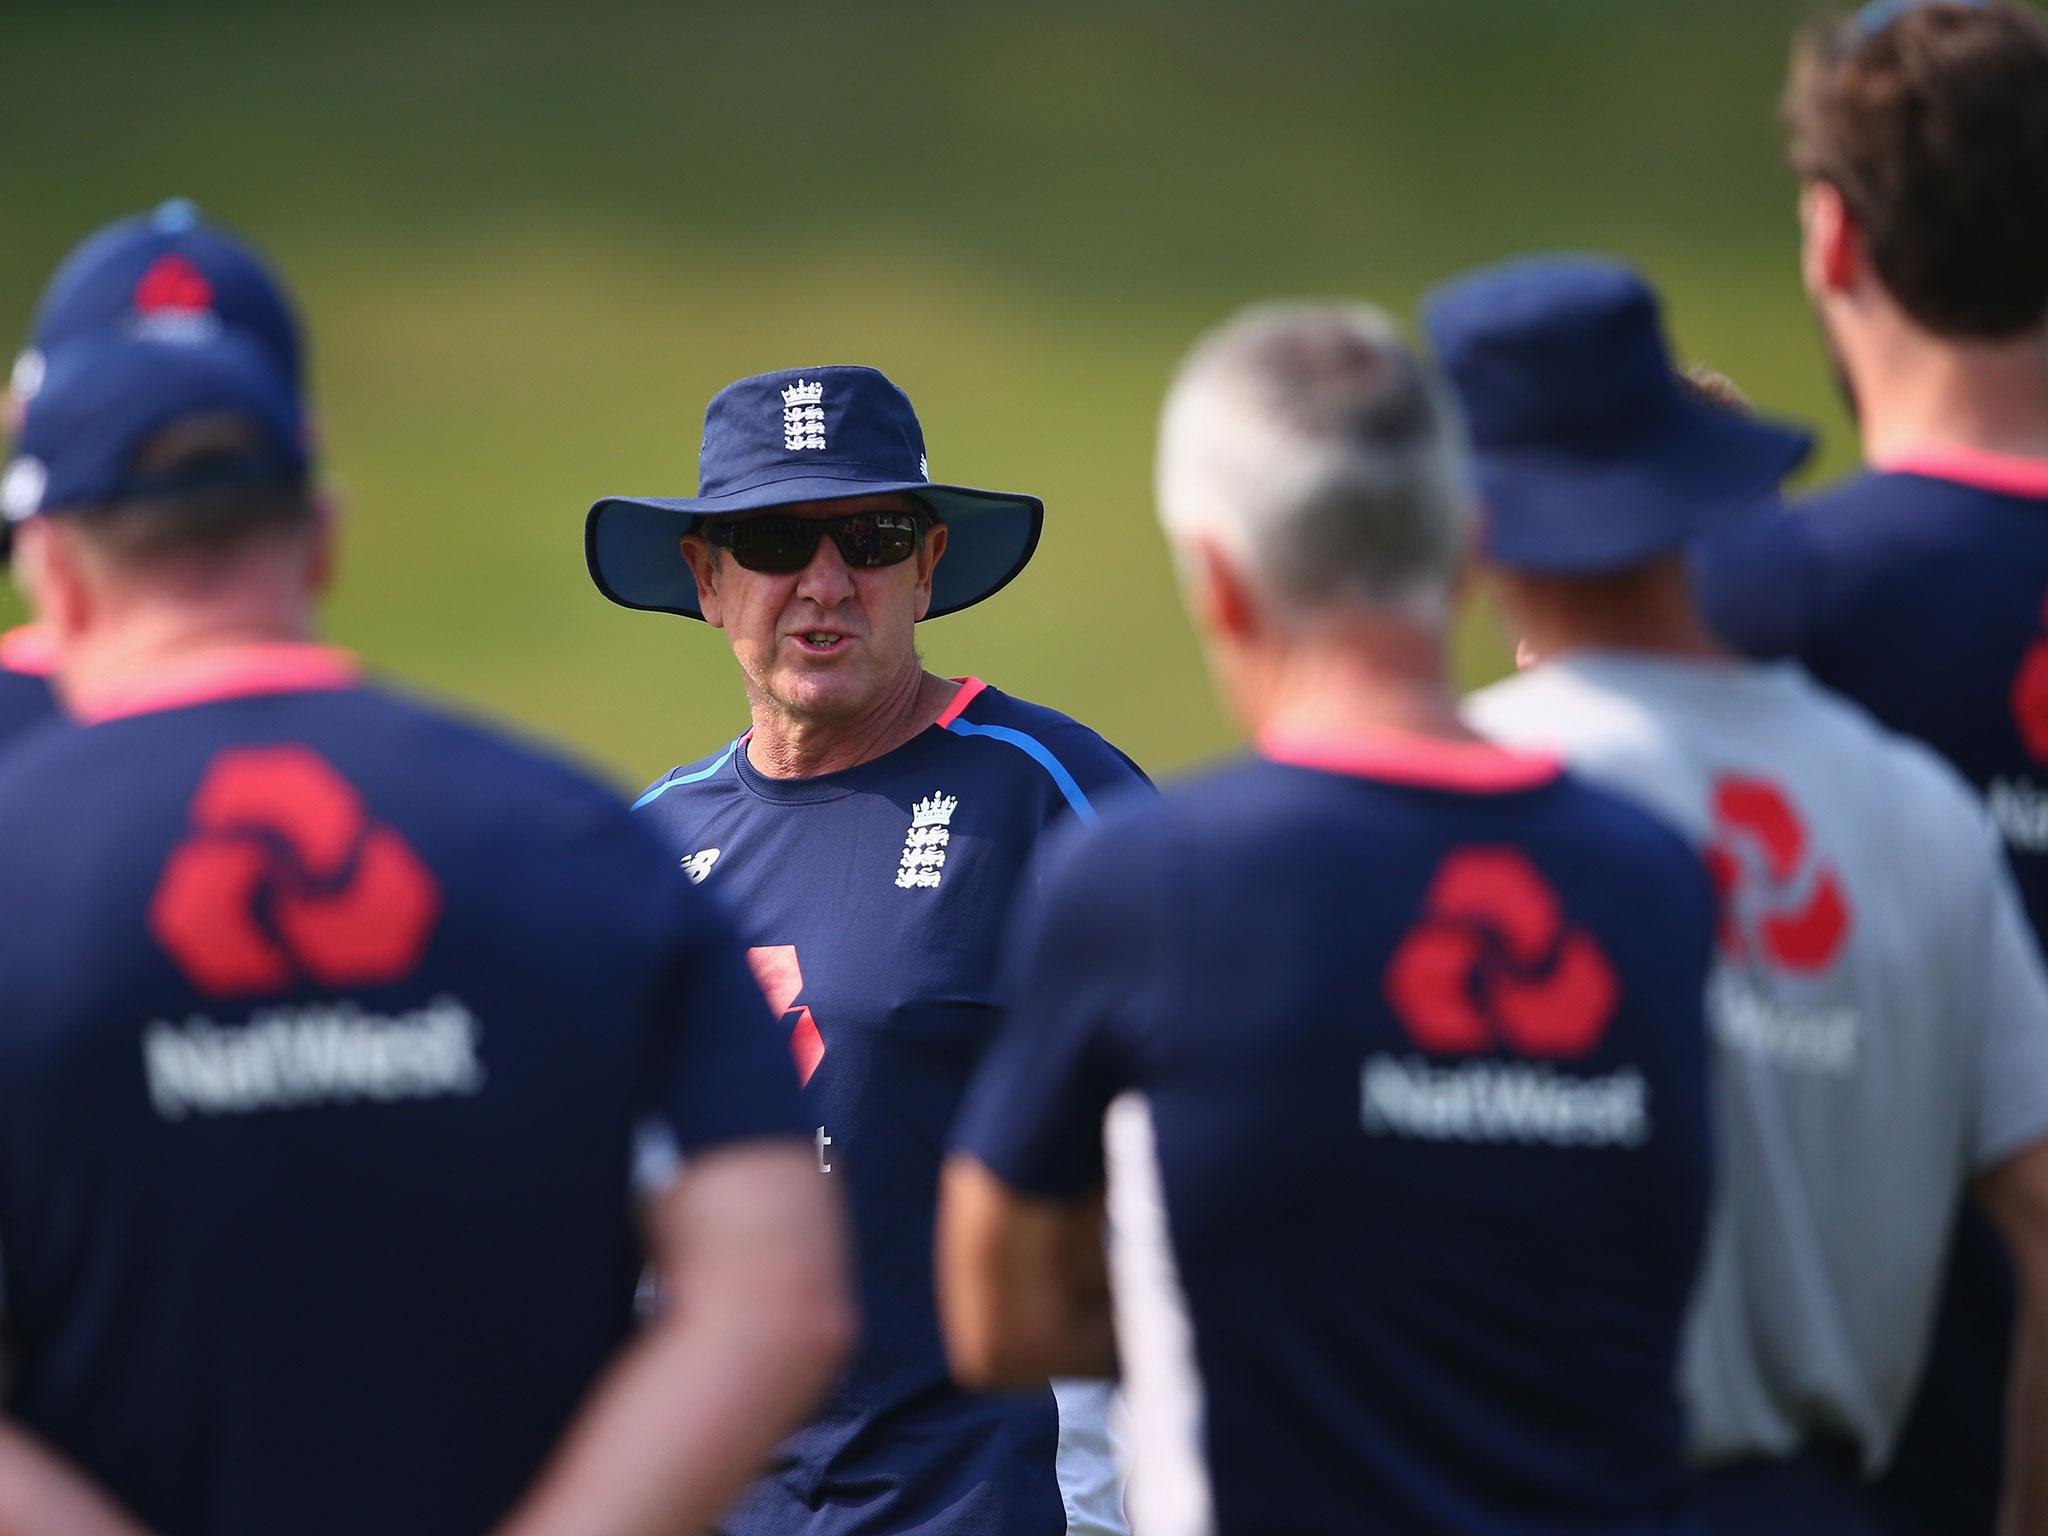 England have stagnated under Trevor Bayliss in recent years